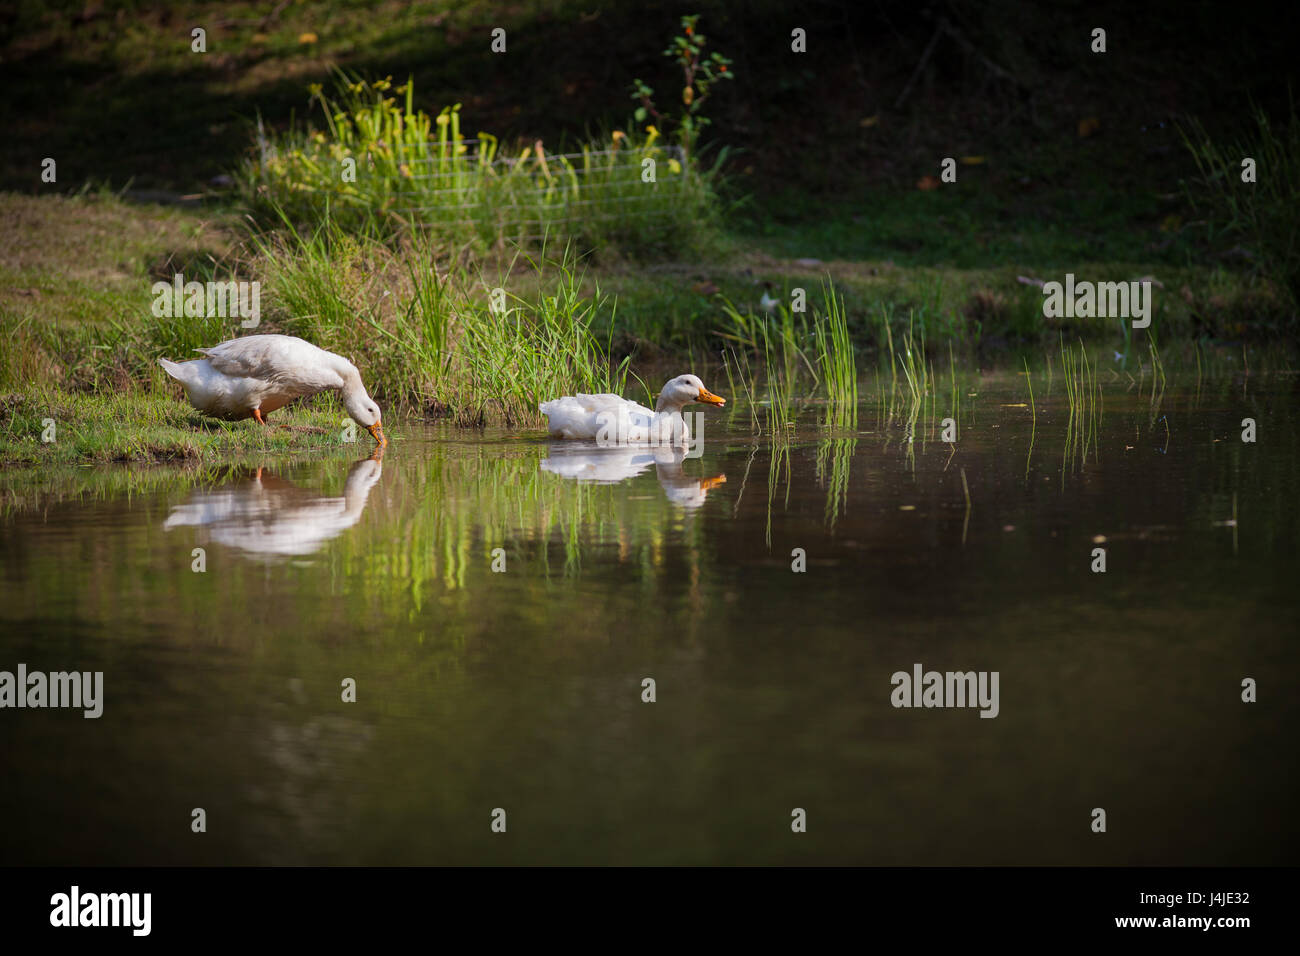 Two white ducks entering a pond for a swim Stock Photo